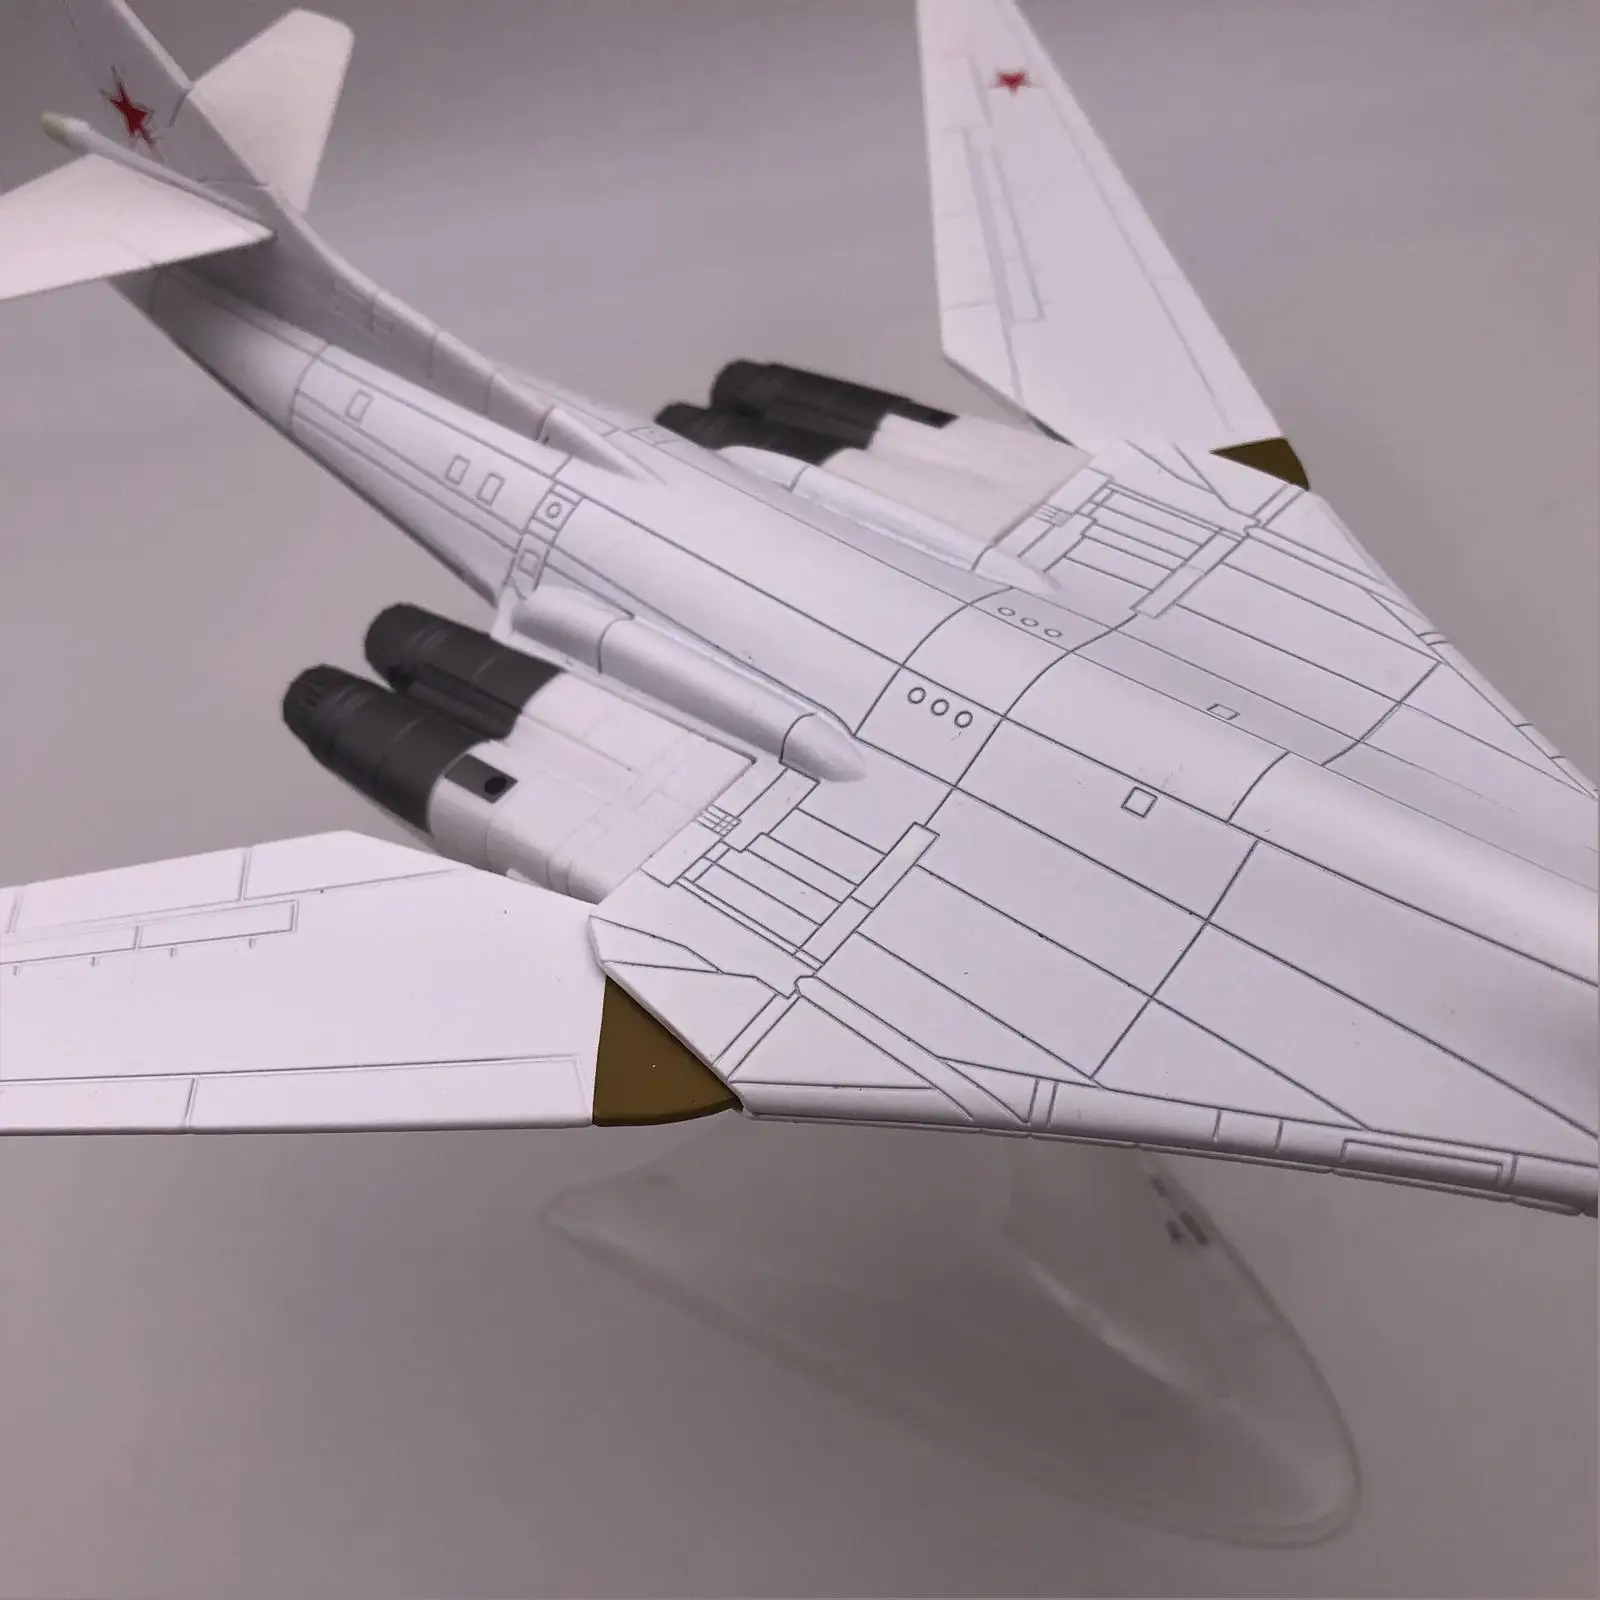 Metal 3D Bomber Fighter Model Plain Fighter Toy 1:200 Scale Air Planes Diecast for Desktop Bedroom Office Collection